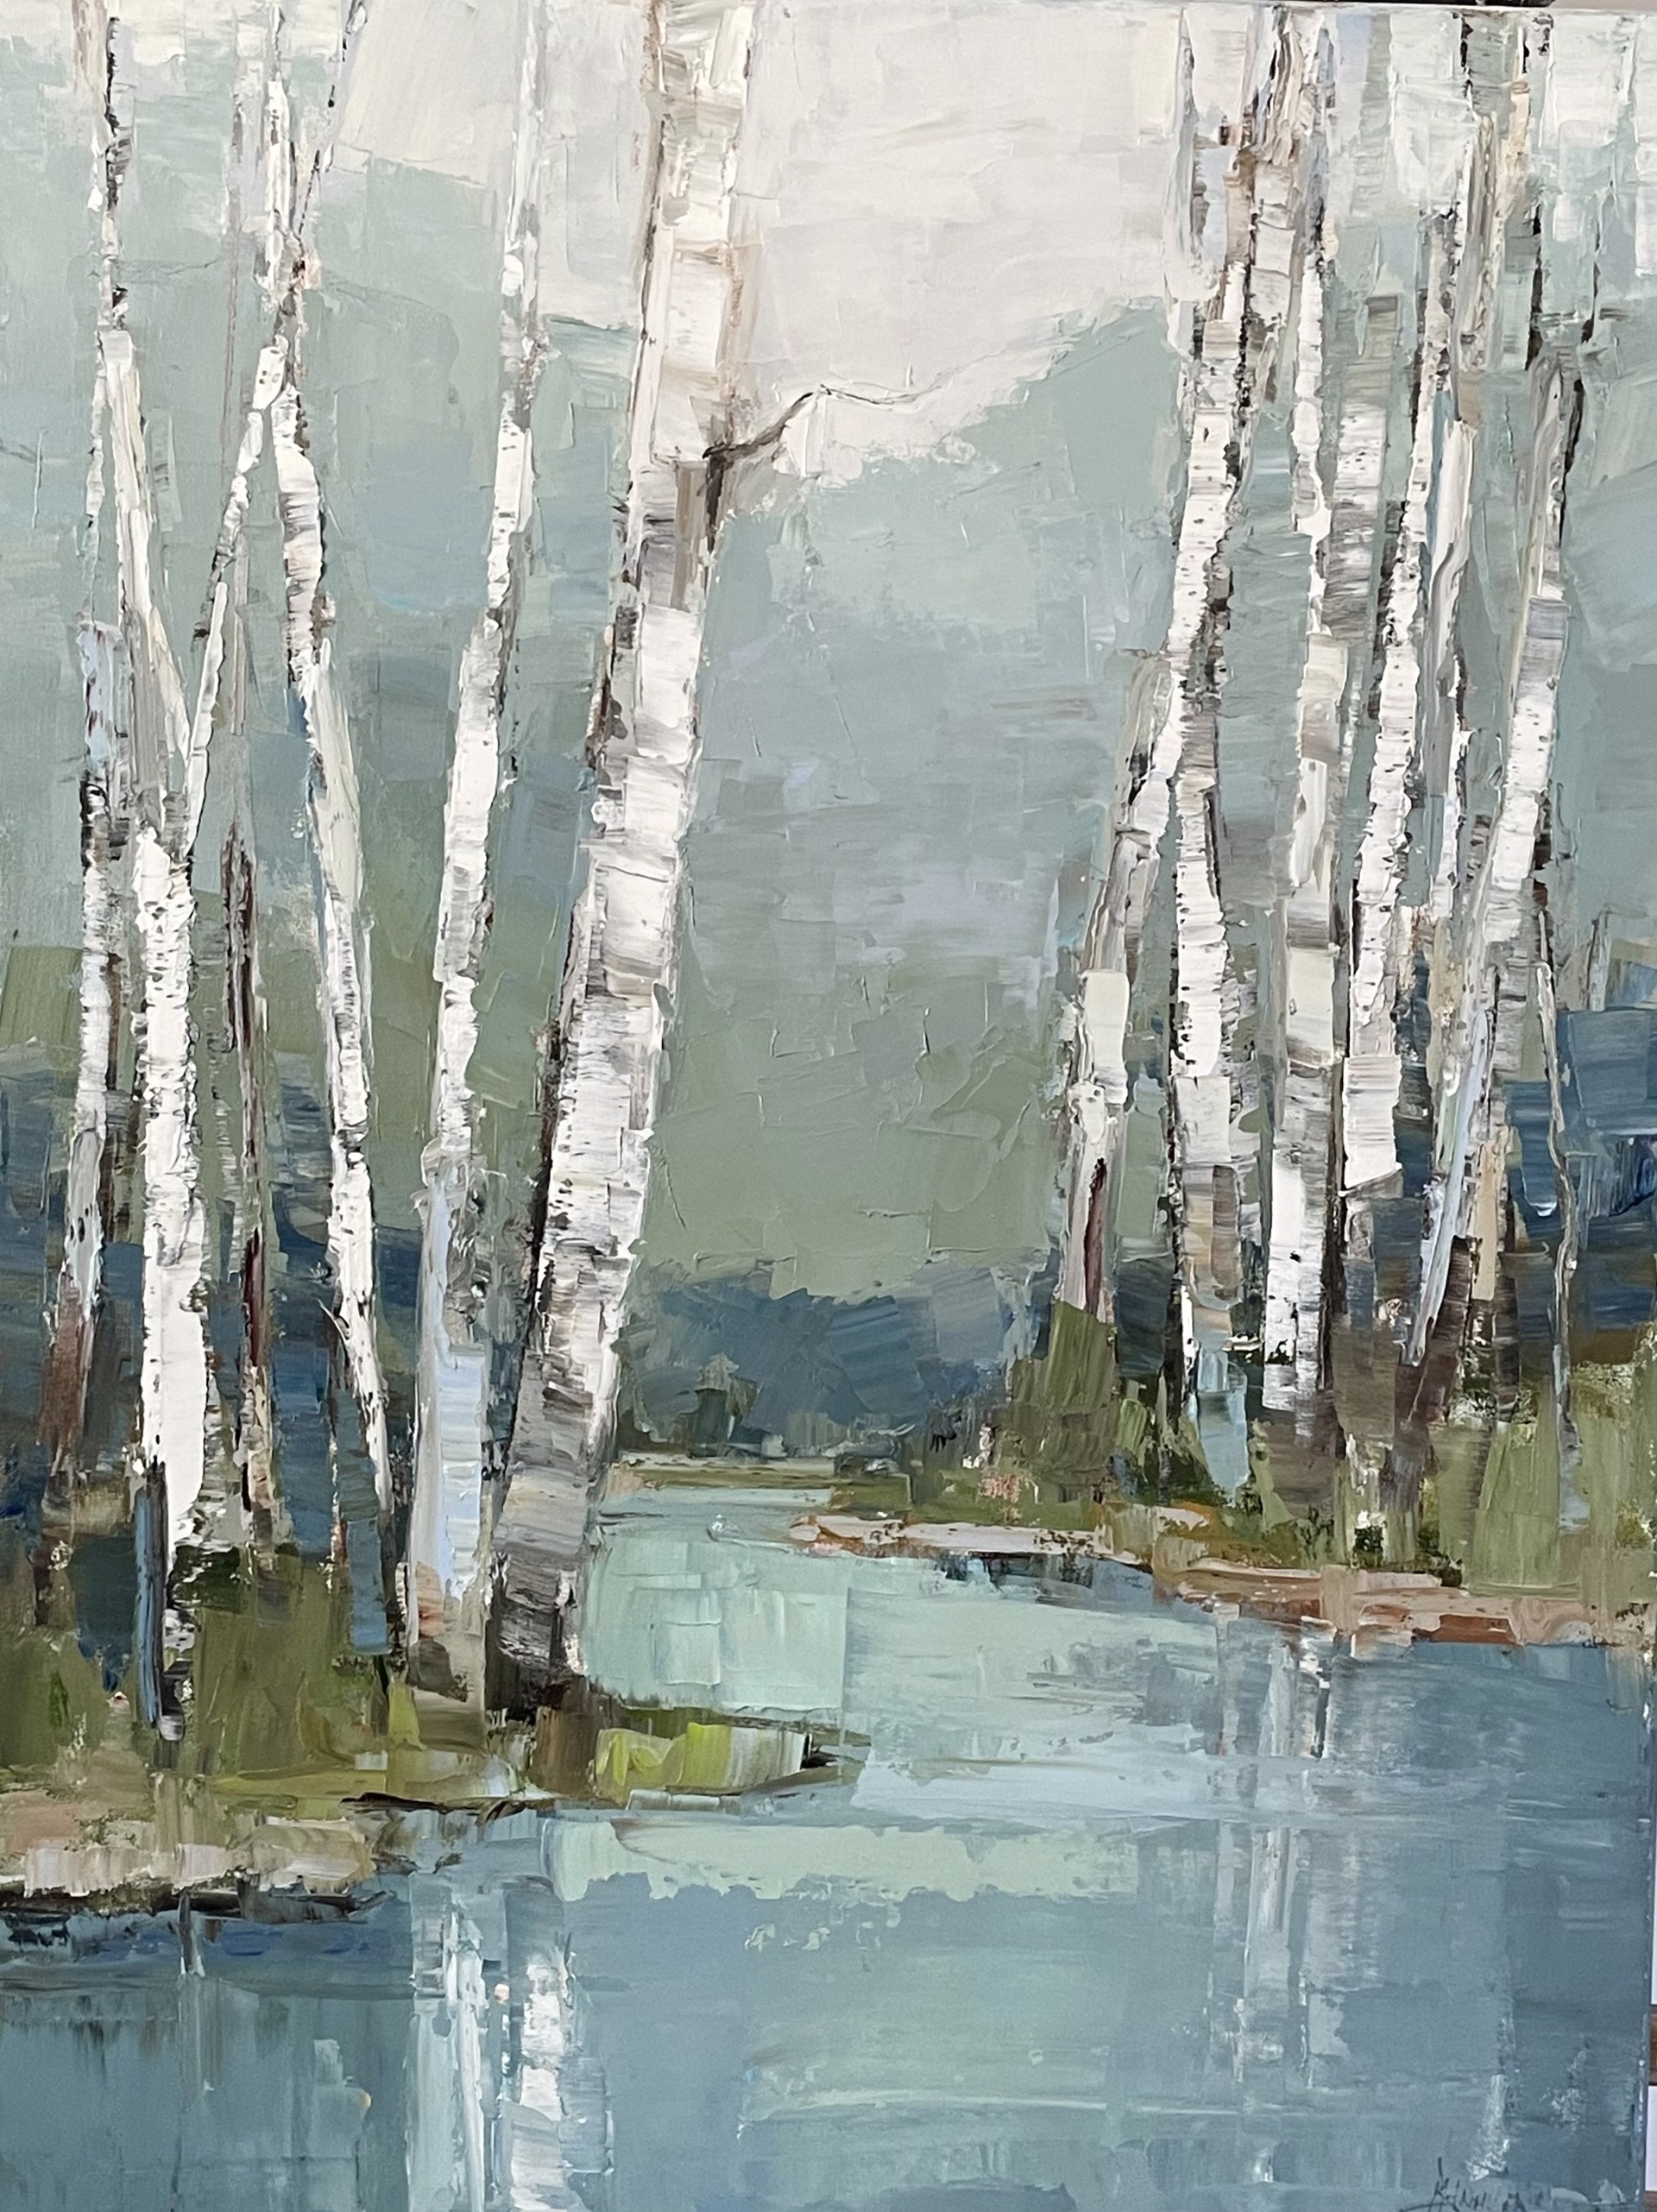 Water Among the Birch by Barbara Flowers